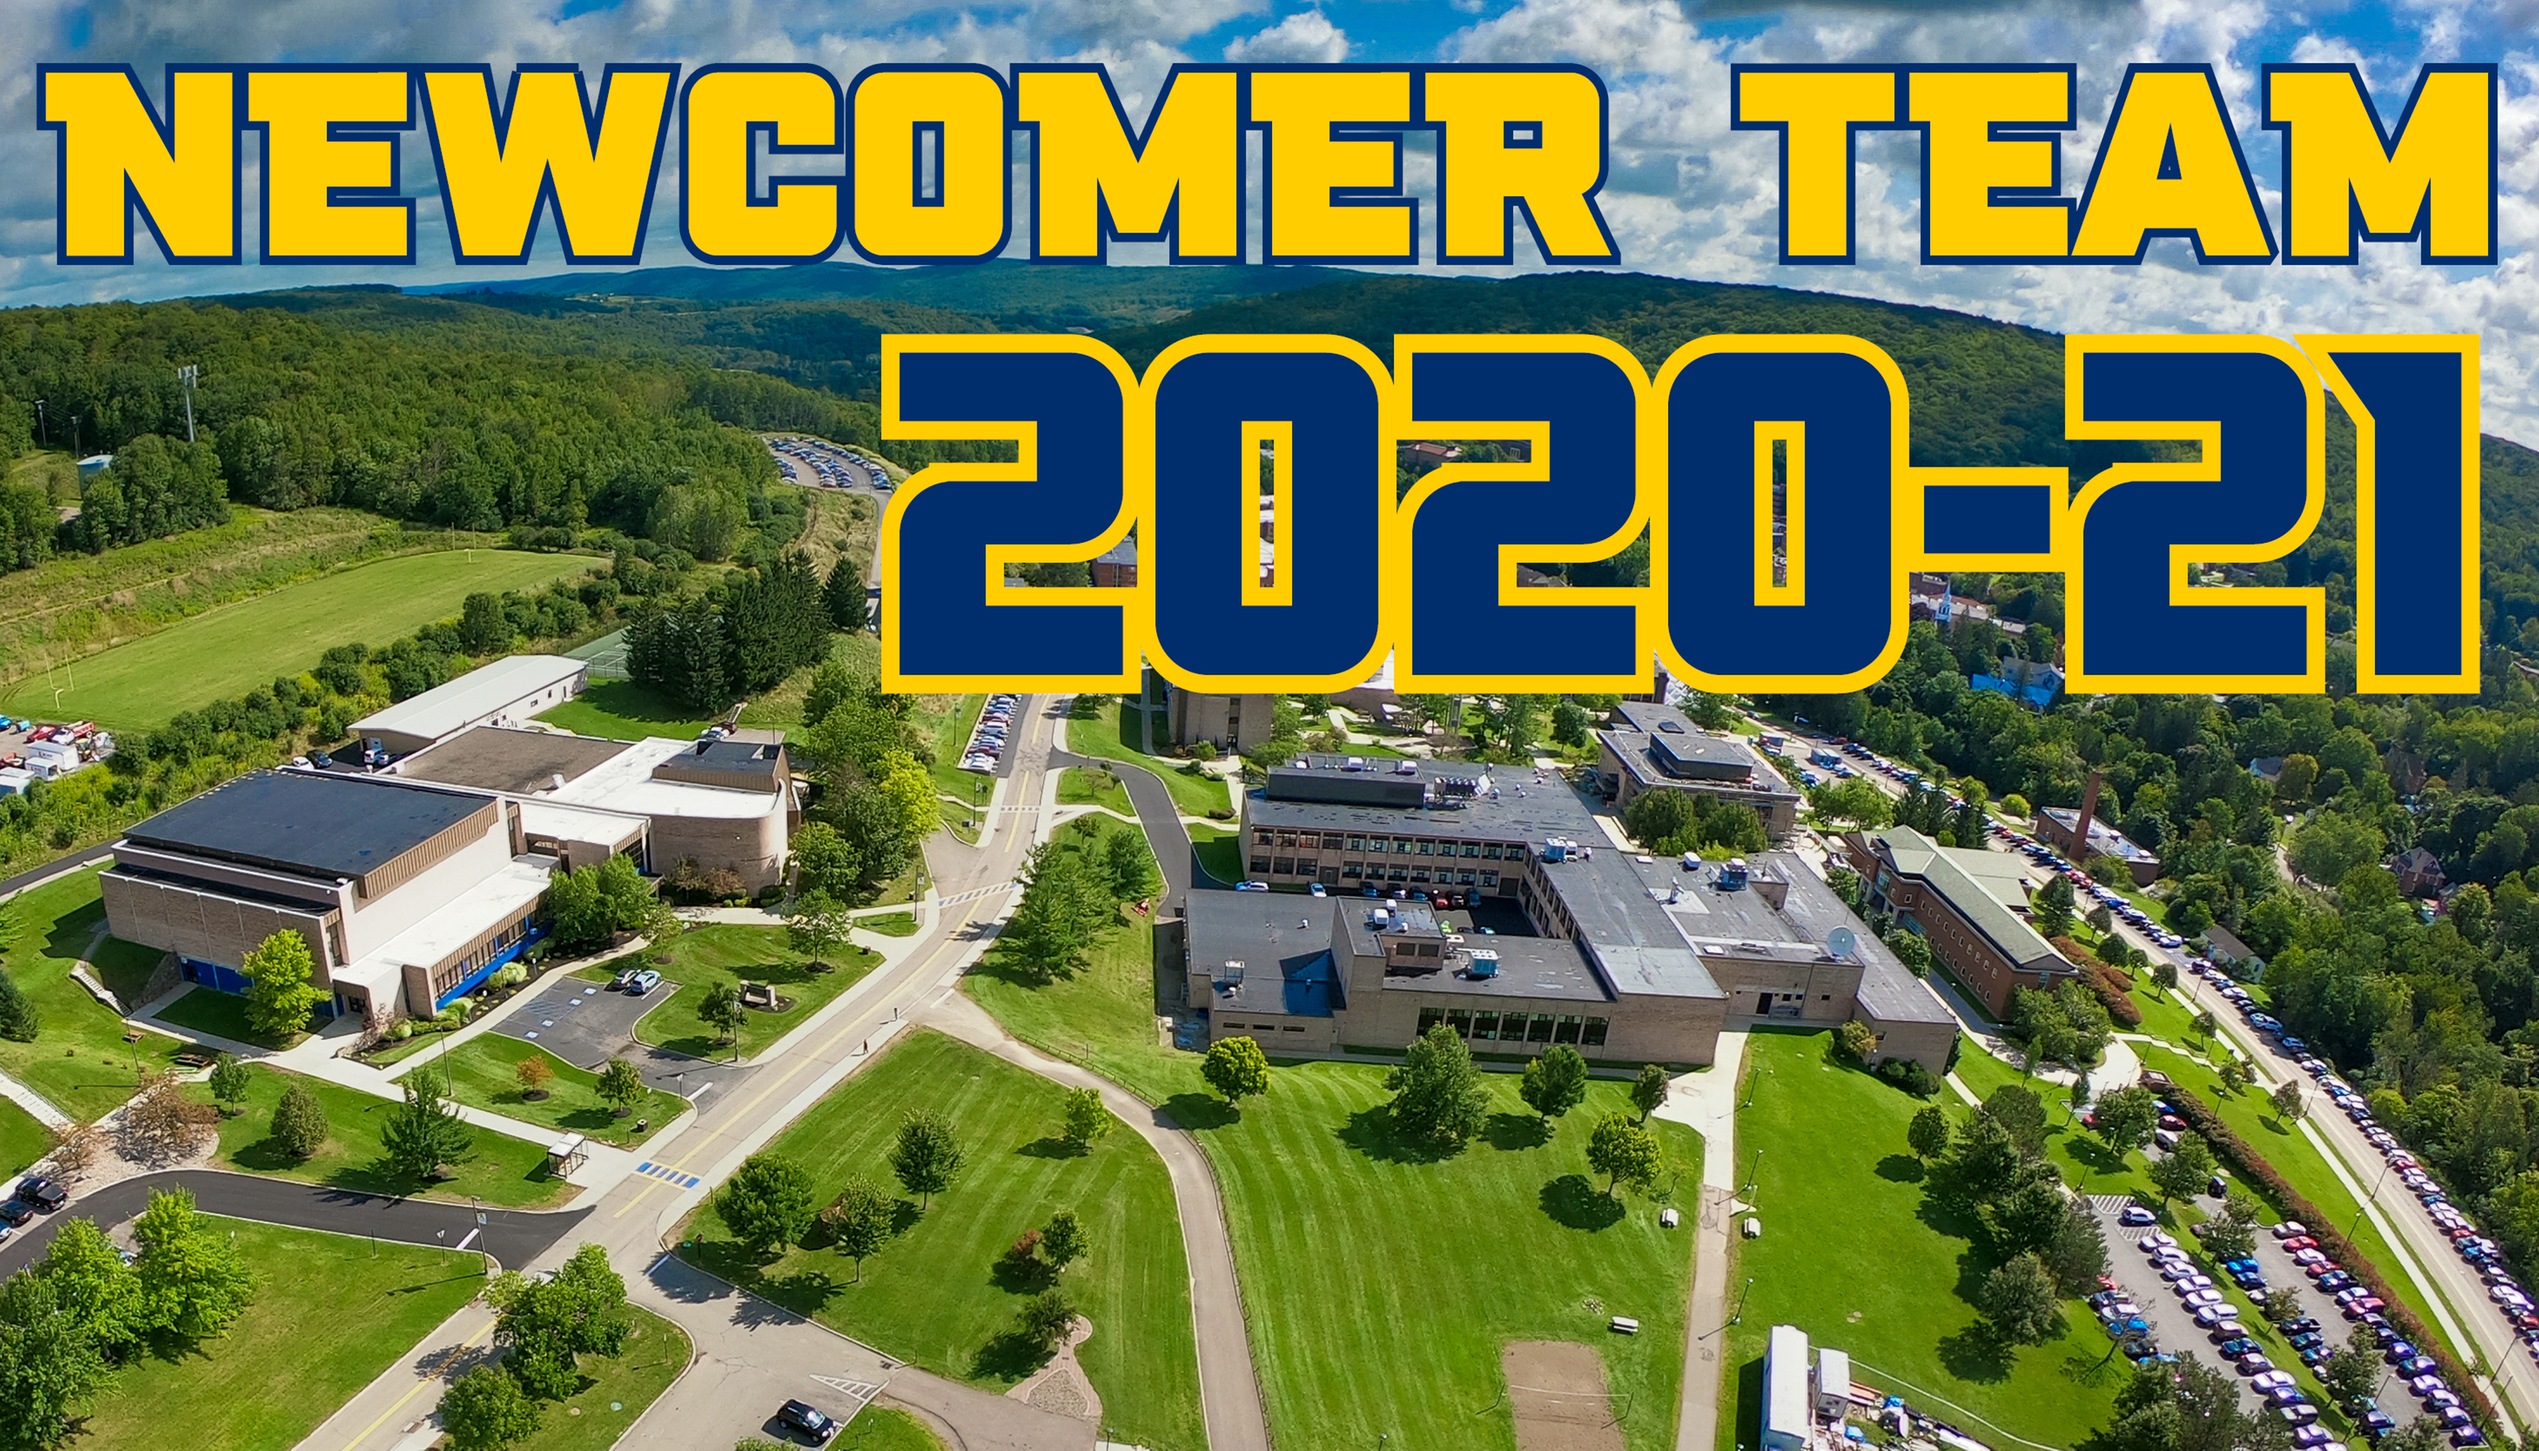 2020-21 Alfred State Newcomer Team - picture features an Arial view of the college campus